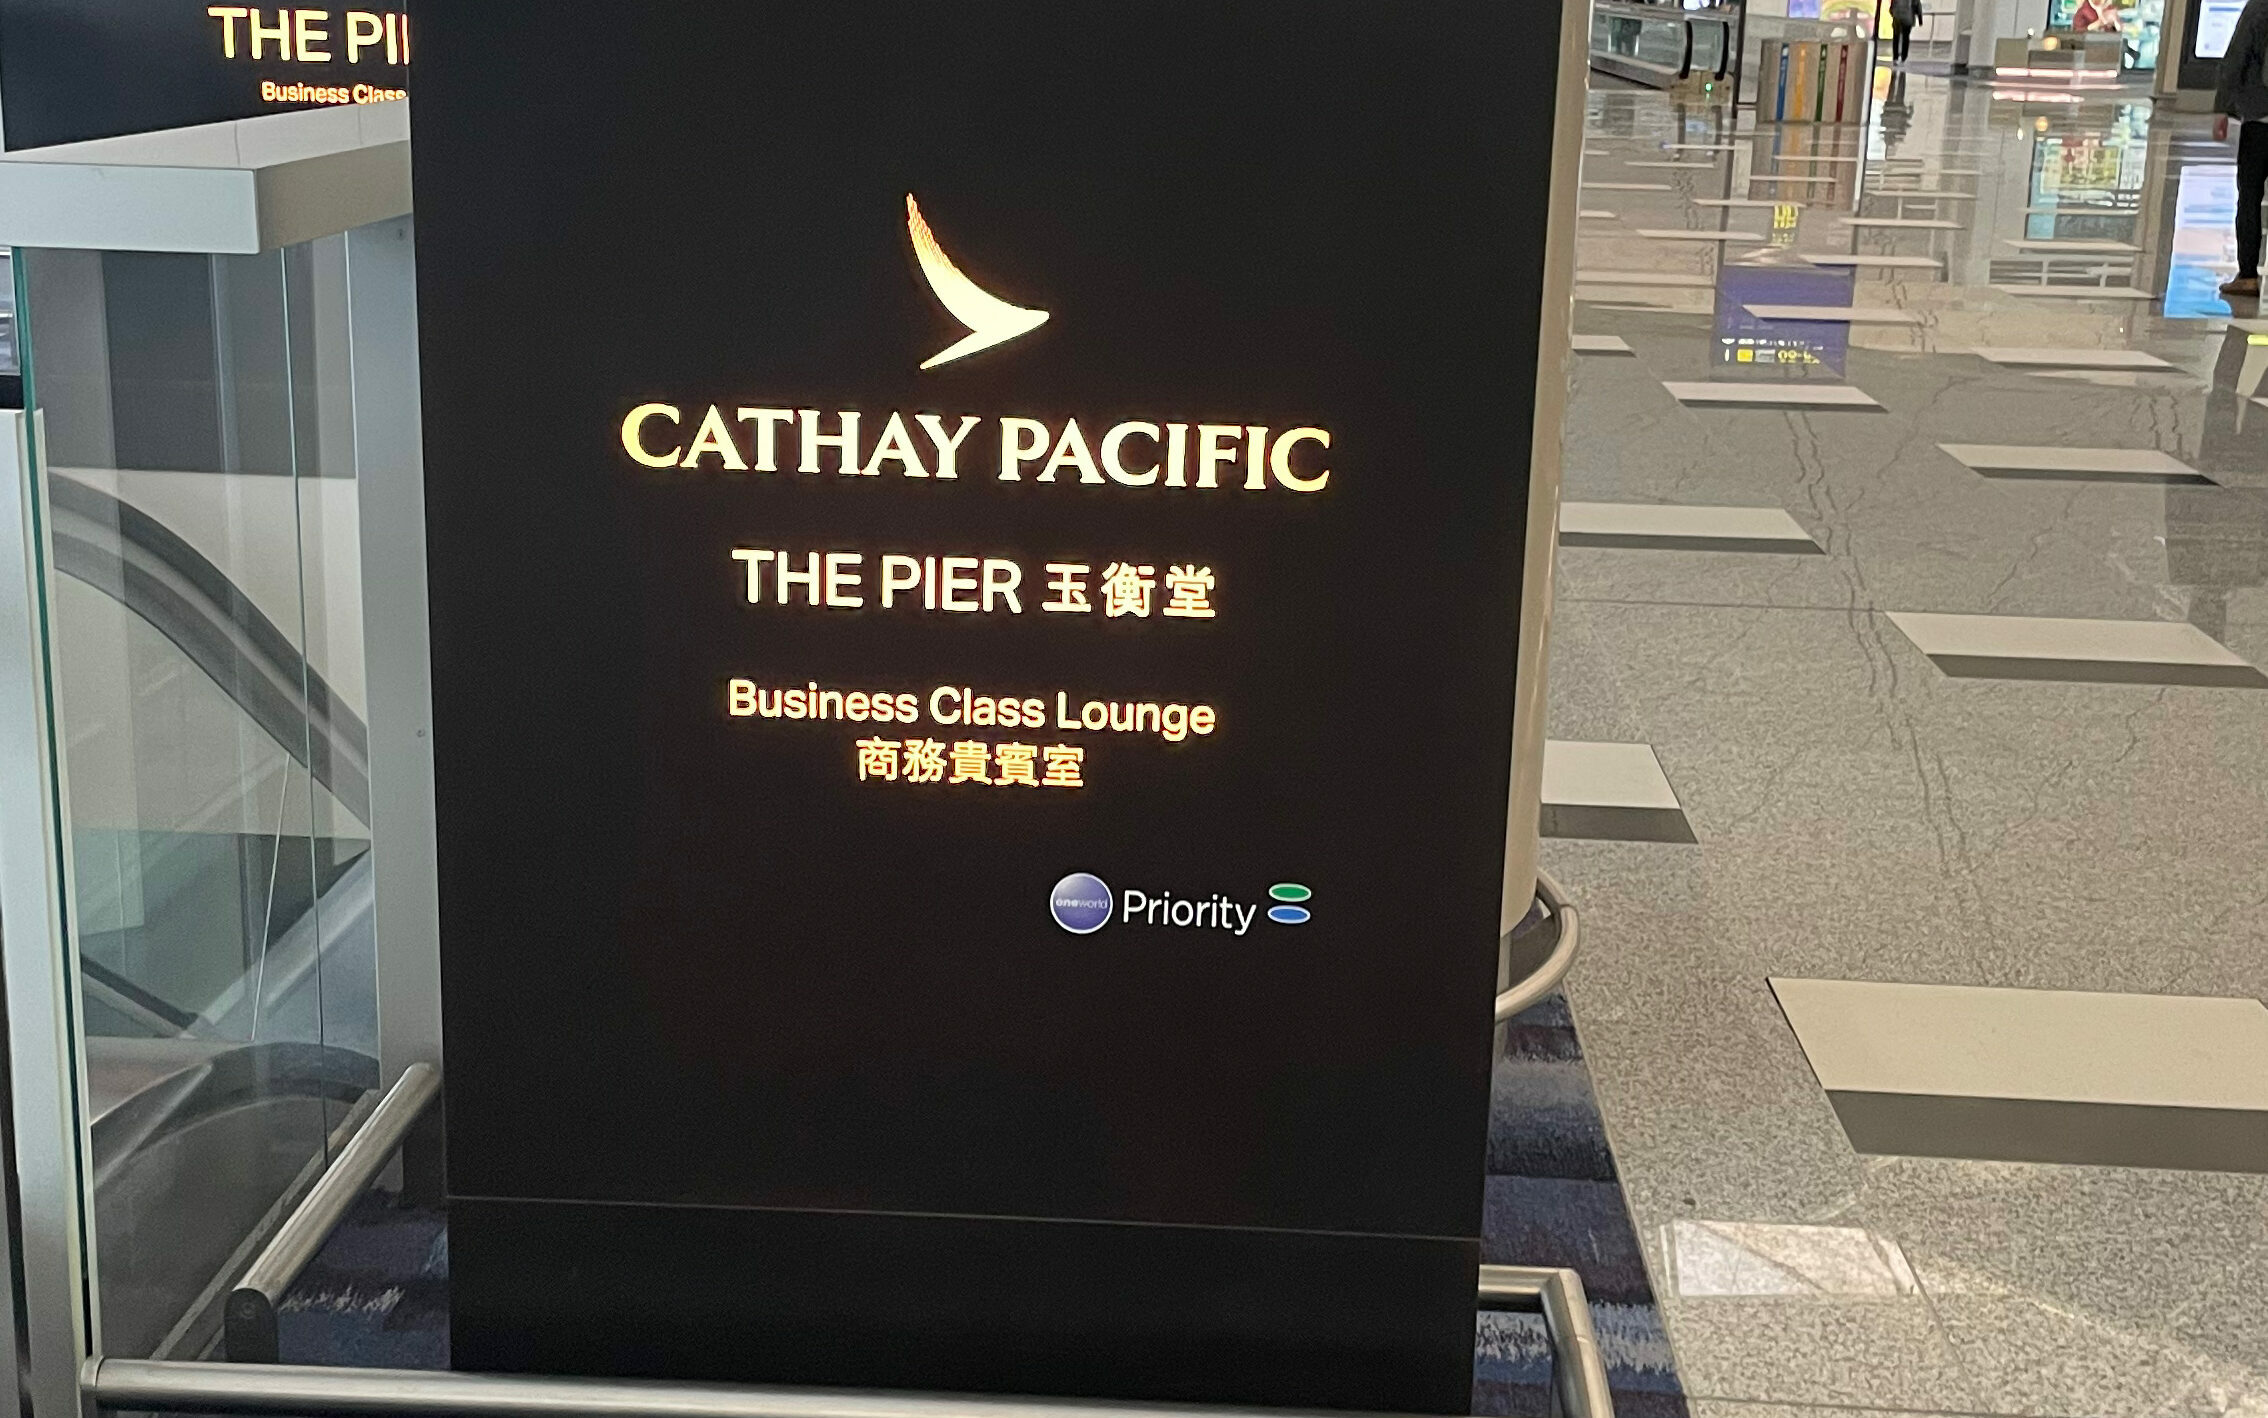 Cathay Pacific The Pier Business Class Lounge at Hong Kong International Airport. Oneworld Sapphire Business Class Lounge.